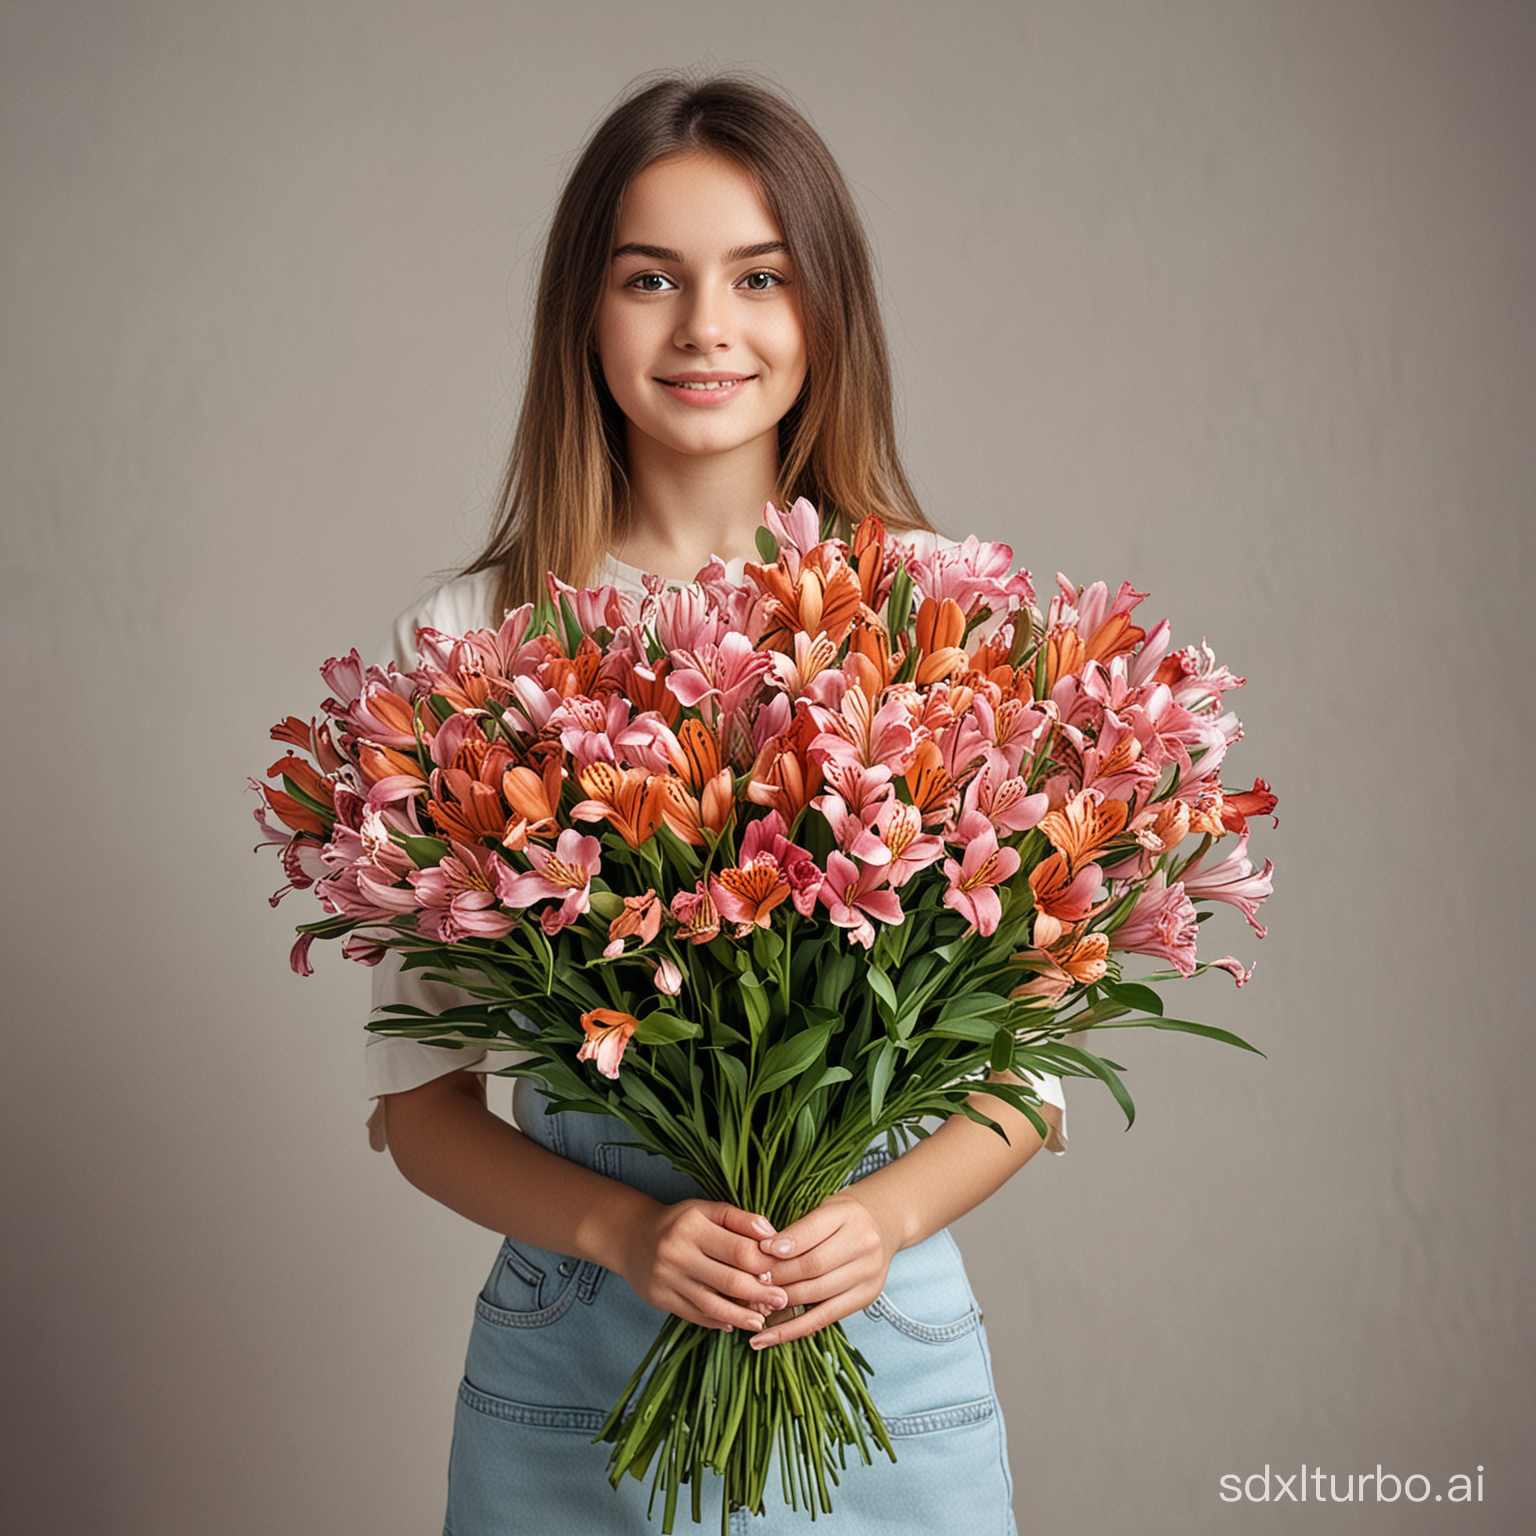 The girl holds a large bouquet of alstroemeria